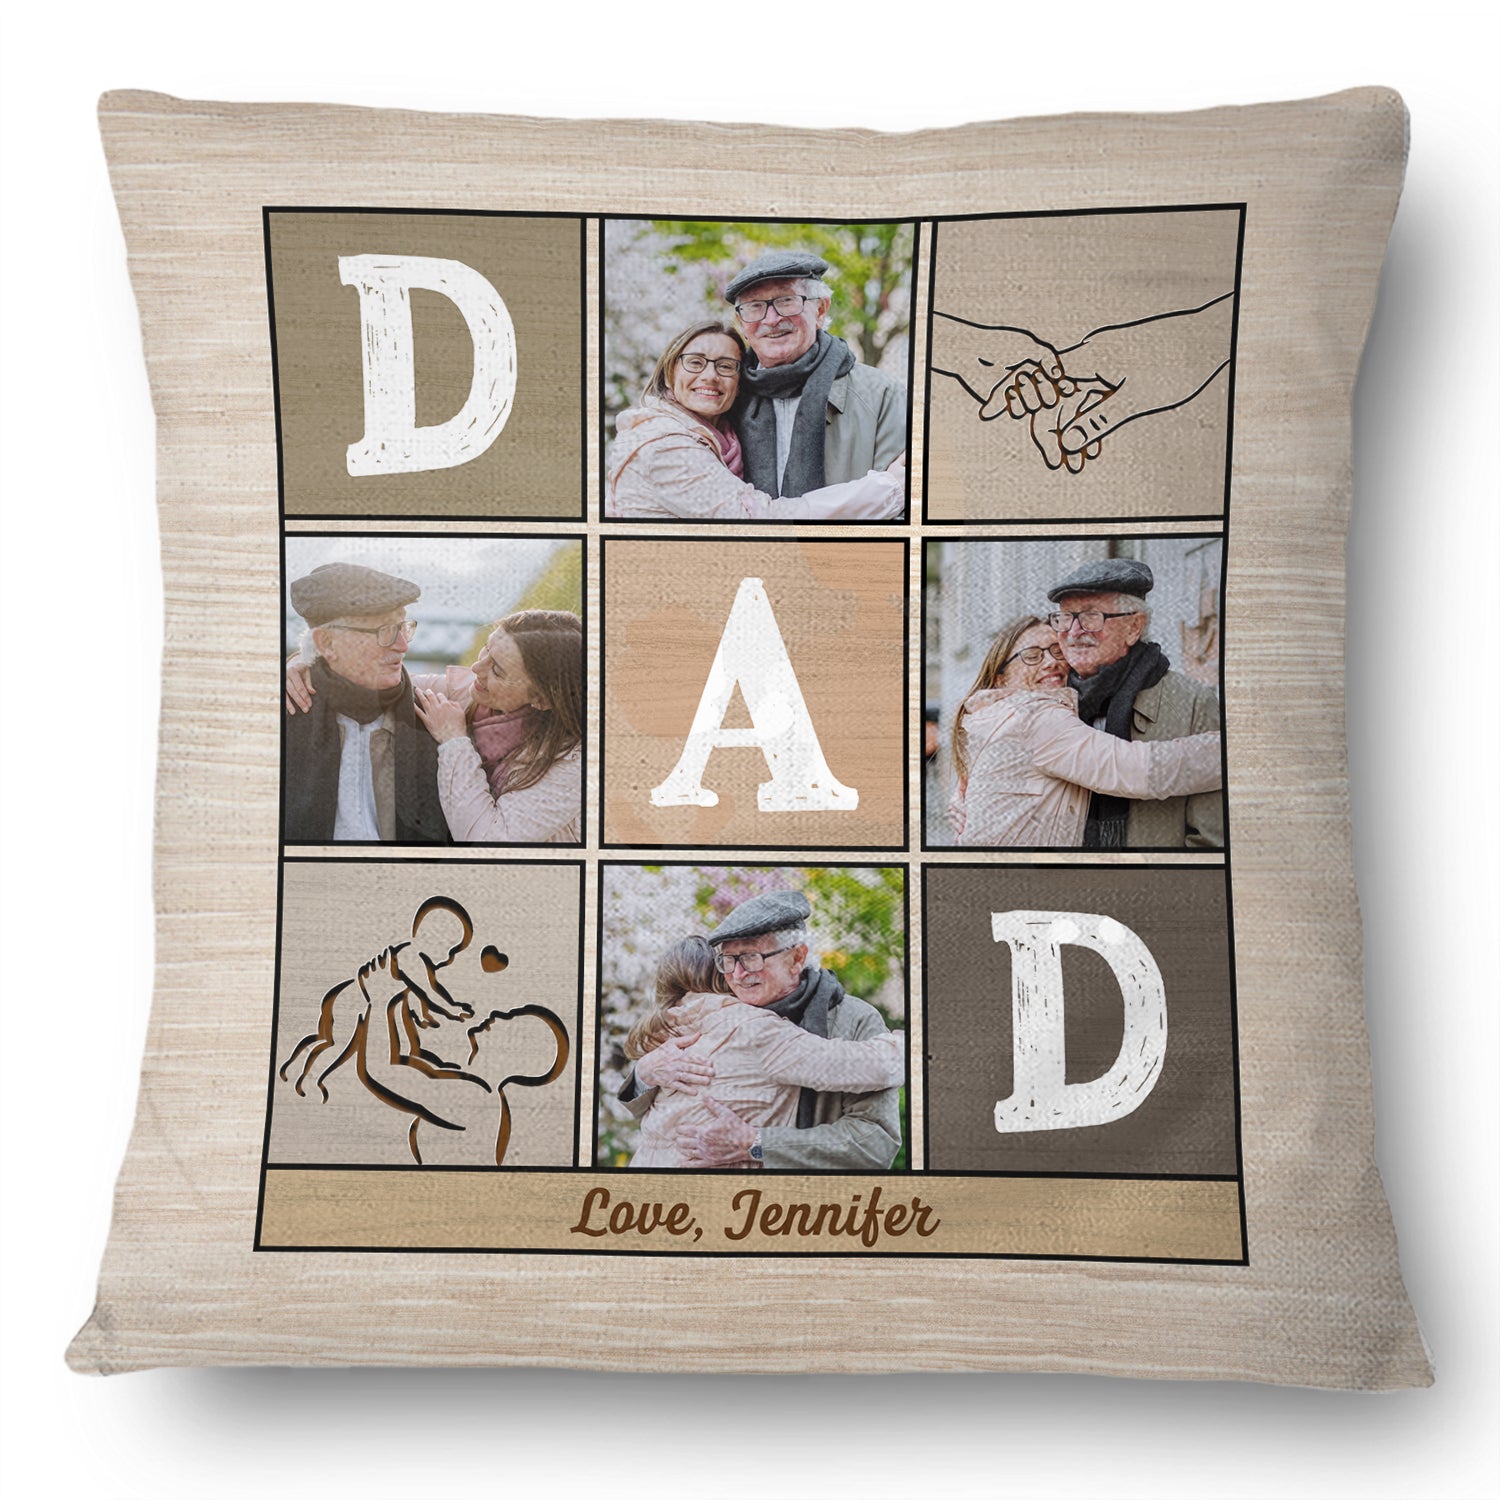 Custom Photo Hold This And Consider It A Big Hug - Birthday, Loving Gift For Dad, Father, Papa, Grandpa, Grandfather - Personalized Custom Pillow